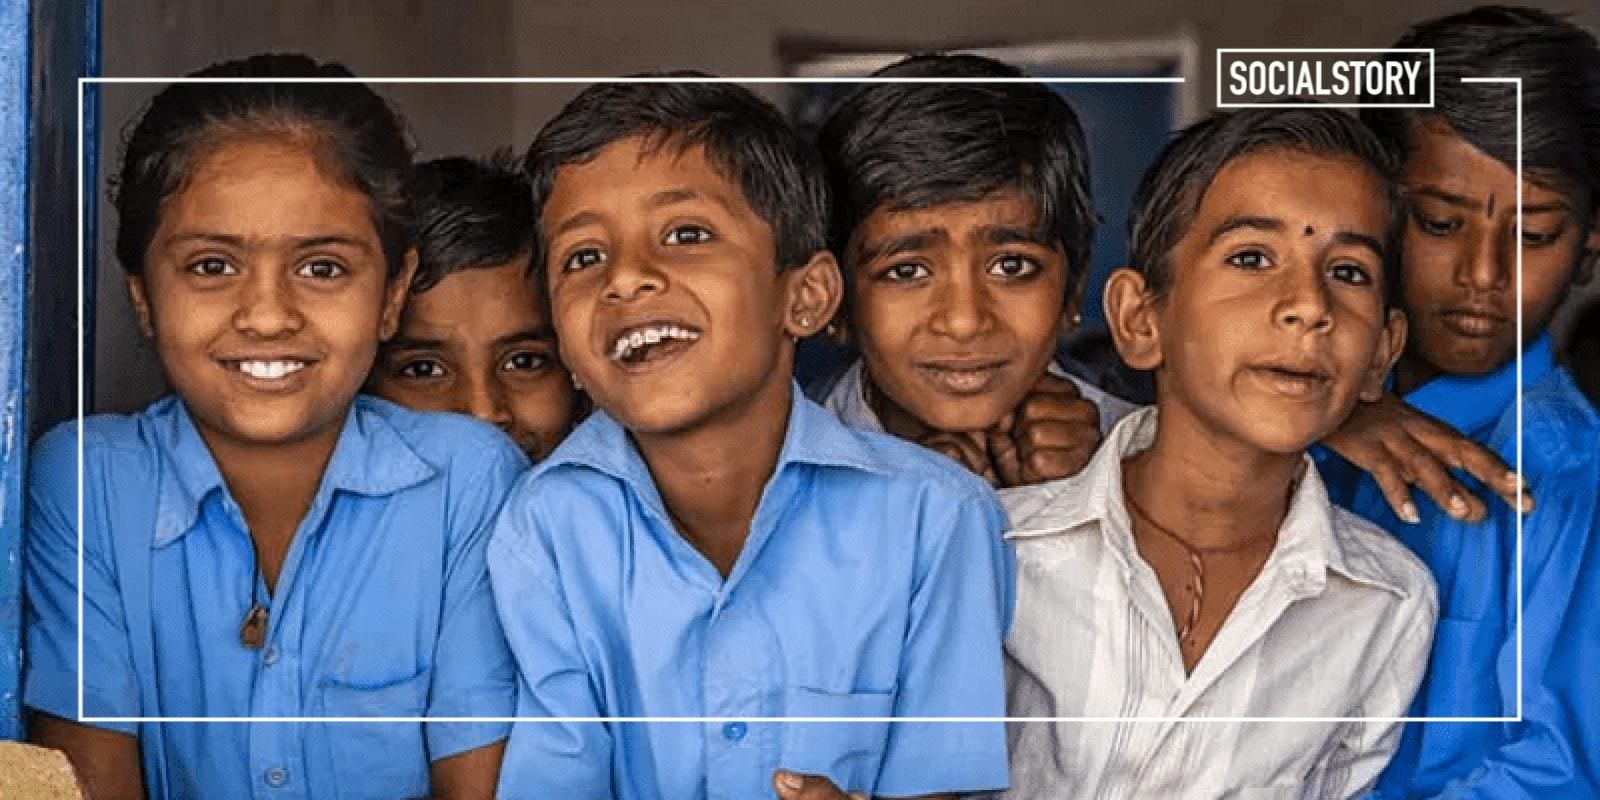 These 5 NGOs are working to brighten up the lives of underprivileged kids